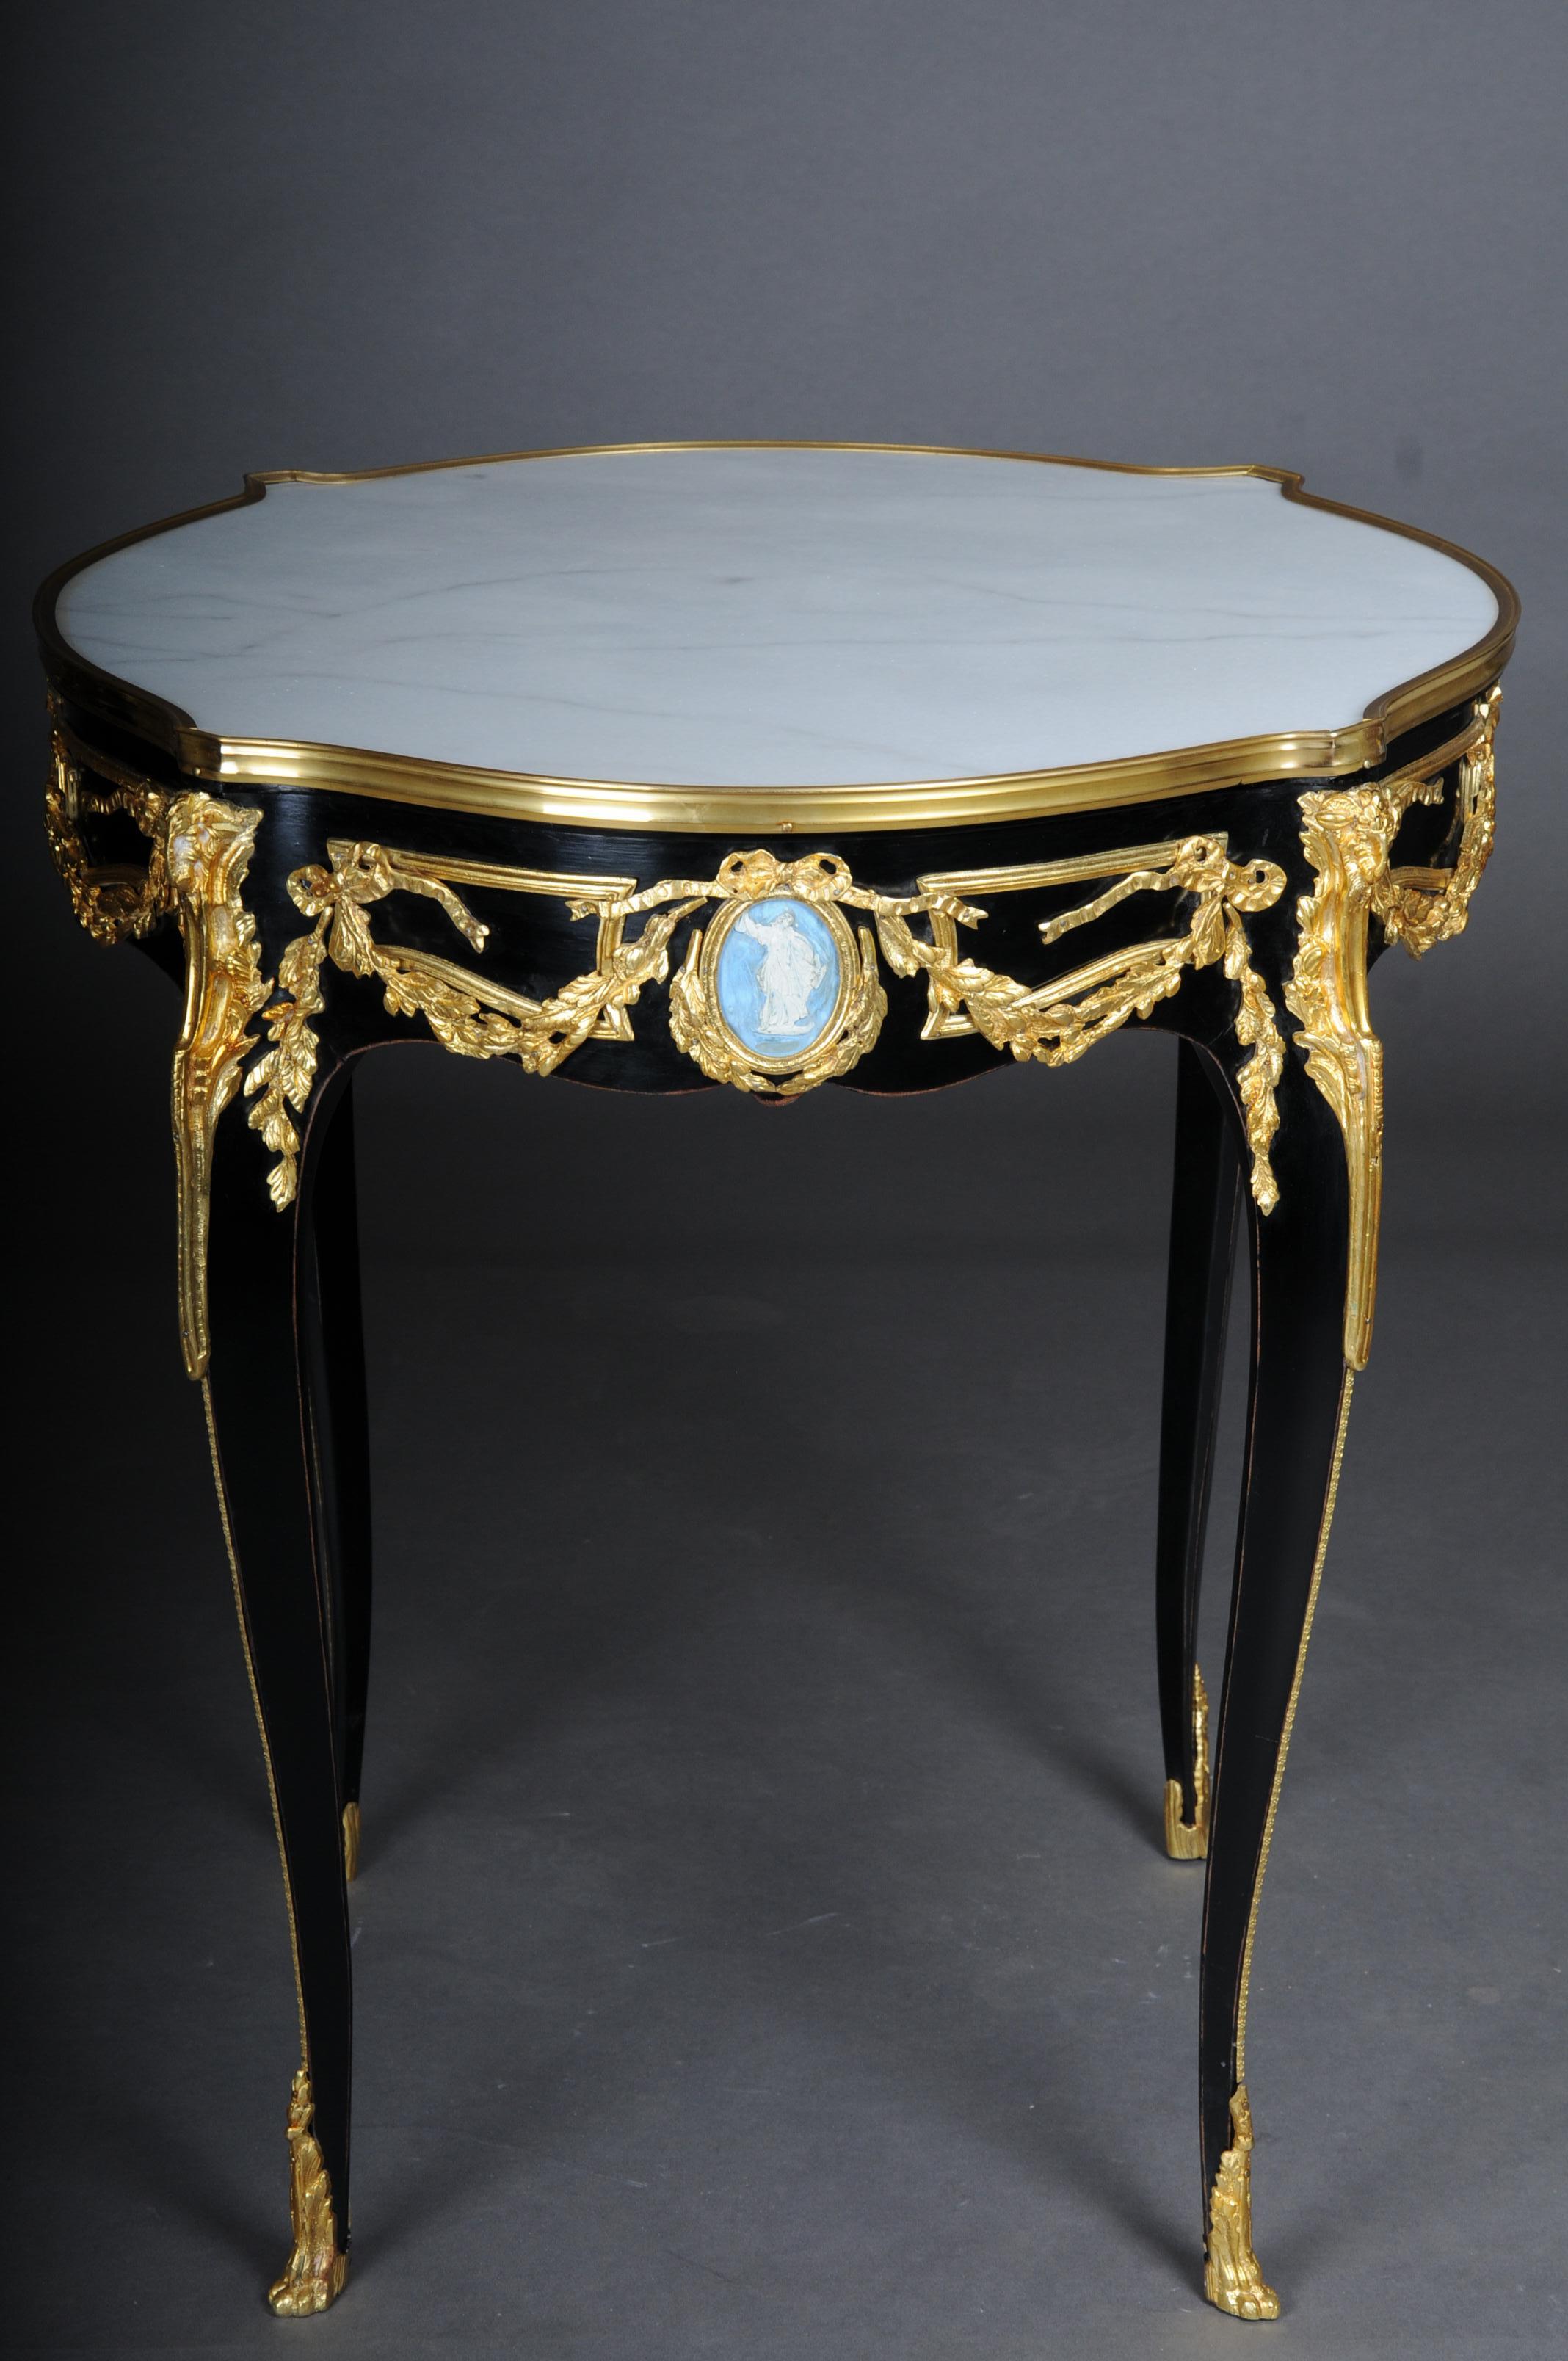 20th Century Classic side table, gilt bronze, black, Louis XV

Solid beech body, blackened with rich brass bronze decorations, gilded. Round white marble top with gilt frame. The marble top has a stunning mottle. Each frame stripe centers a